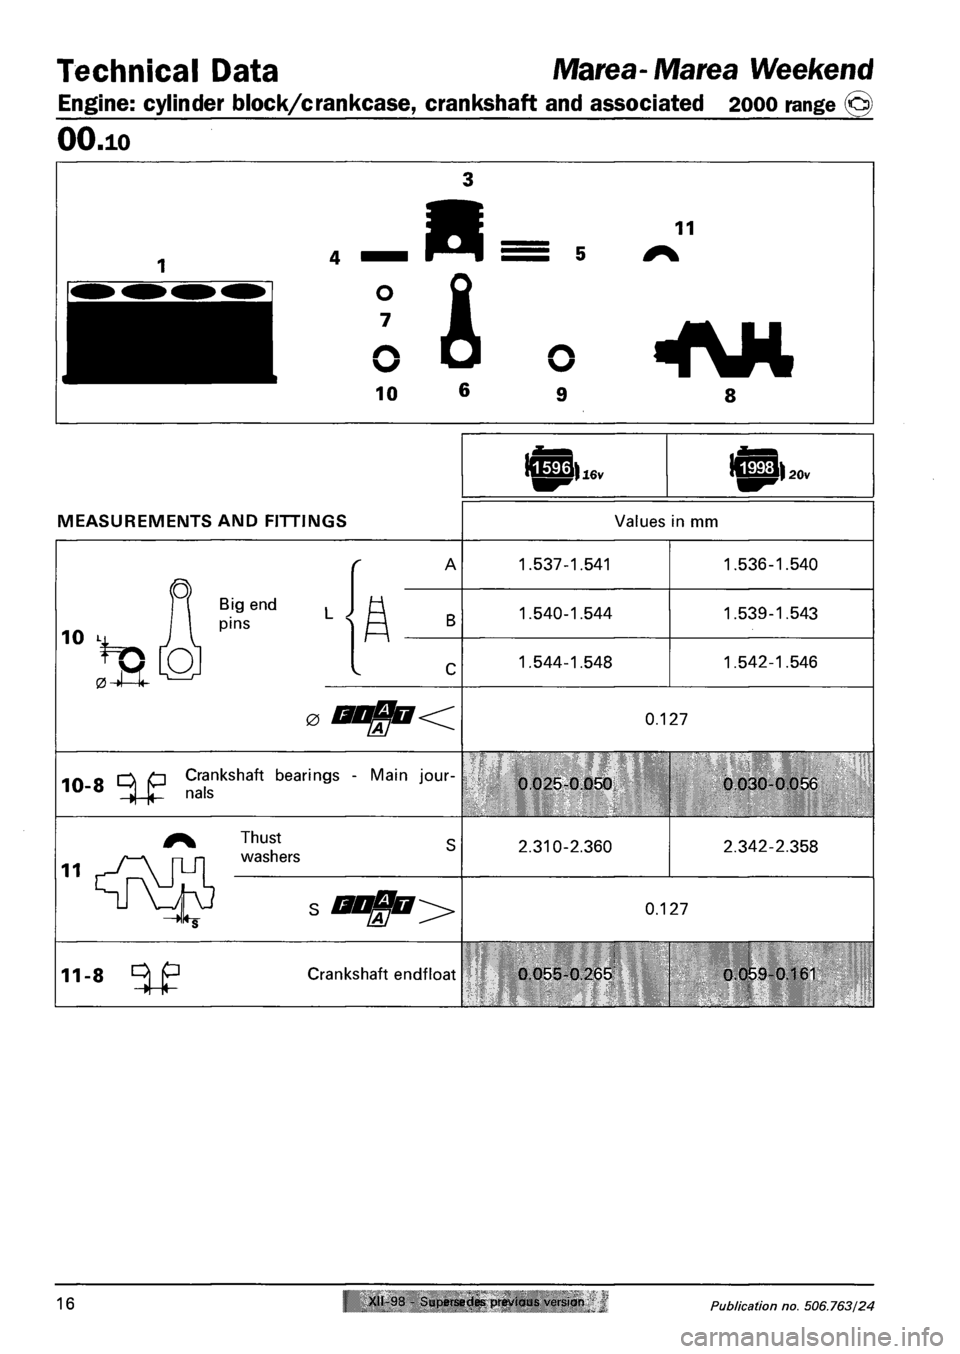 FIAT MAREA 2000 1.G Owners Manual Technical Data Marea- Marea Weekend 
Engine: cylinder block/crankcase, crankshaft and associated 2000 range @ 
OO.io 
MEASUREMENTS AND FITTINGS Values in mm 
10 K 
*P [O 
Big end 
pins 
1.537-1.541 
1